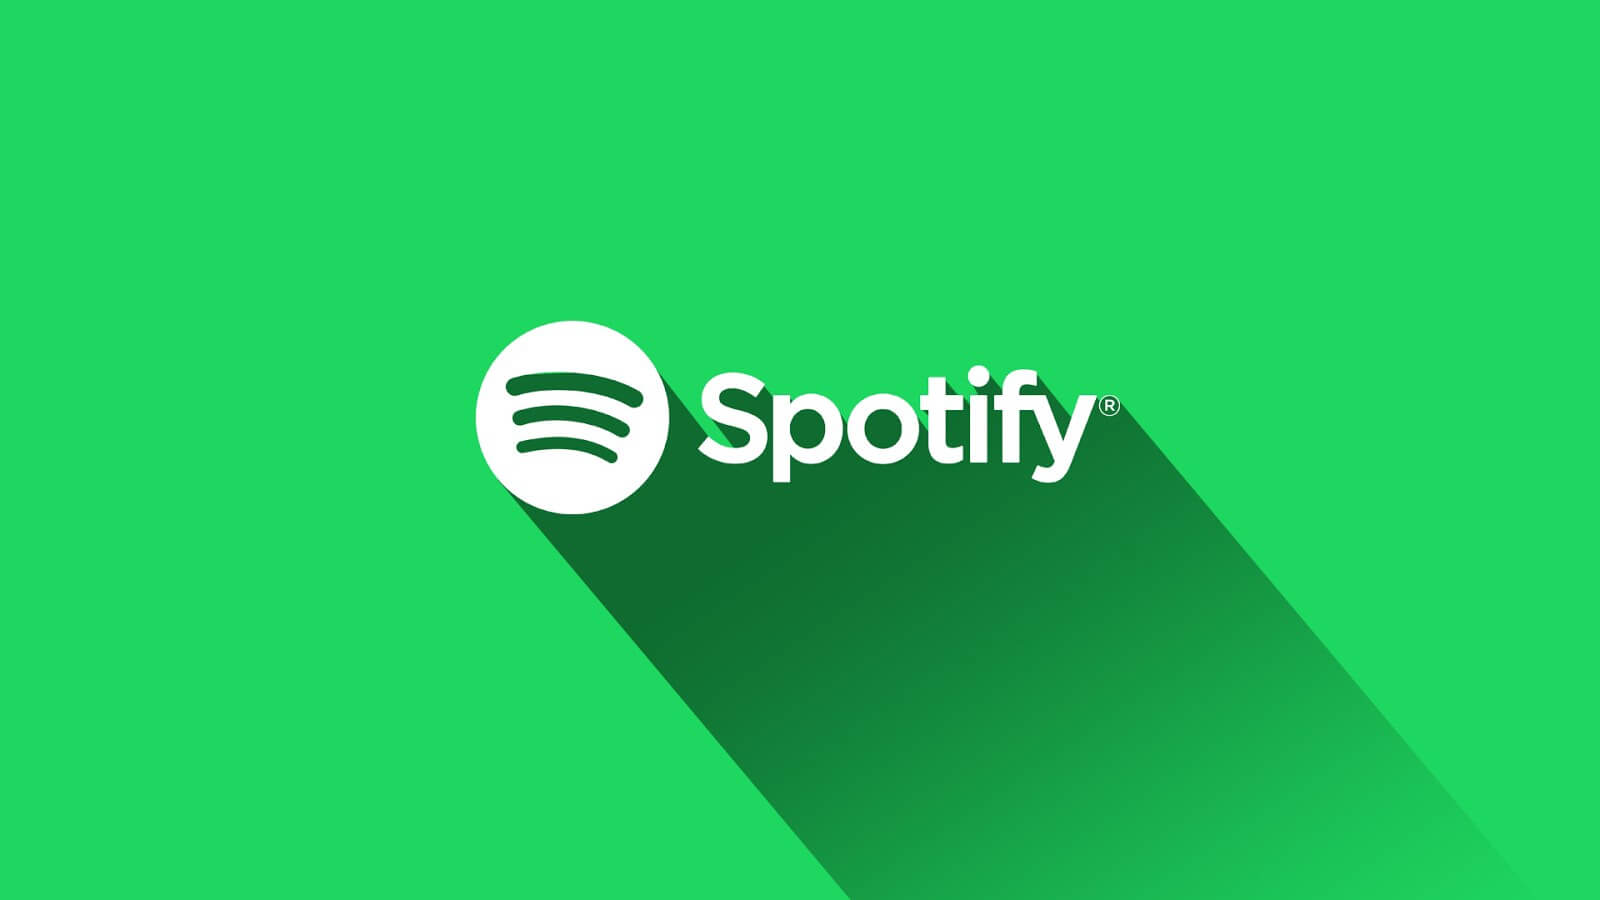 AT&amp;T subscribers can get Spotify Premium for free